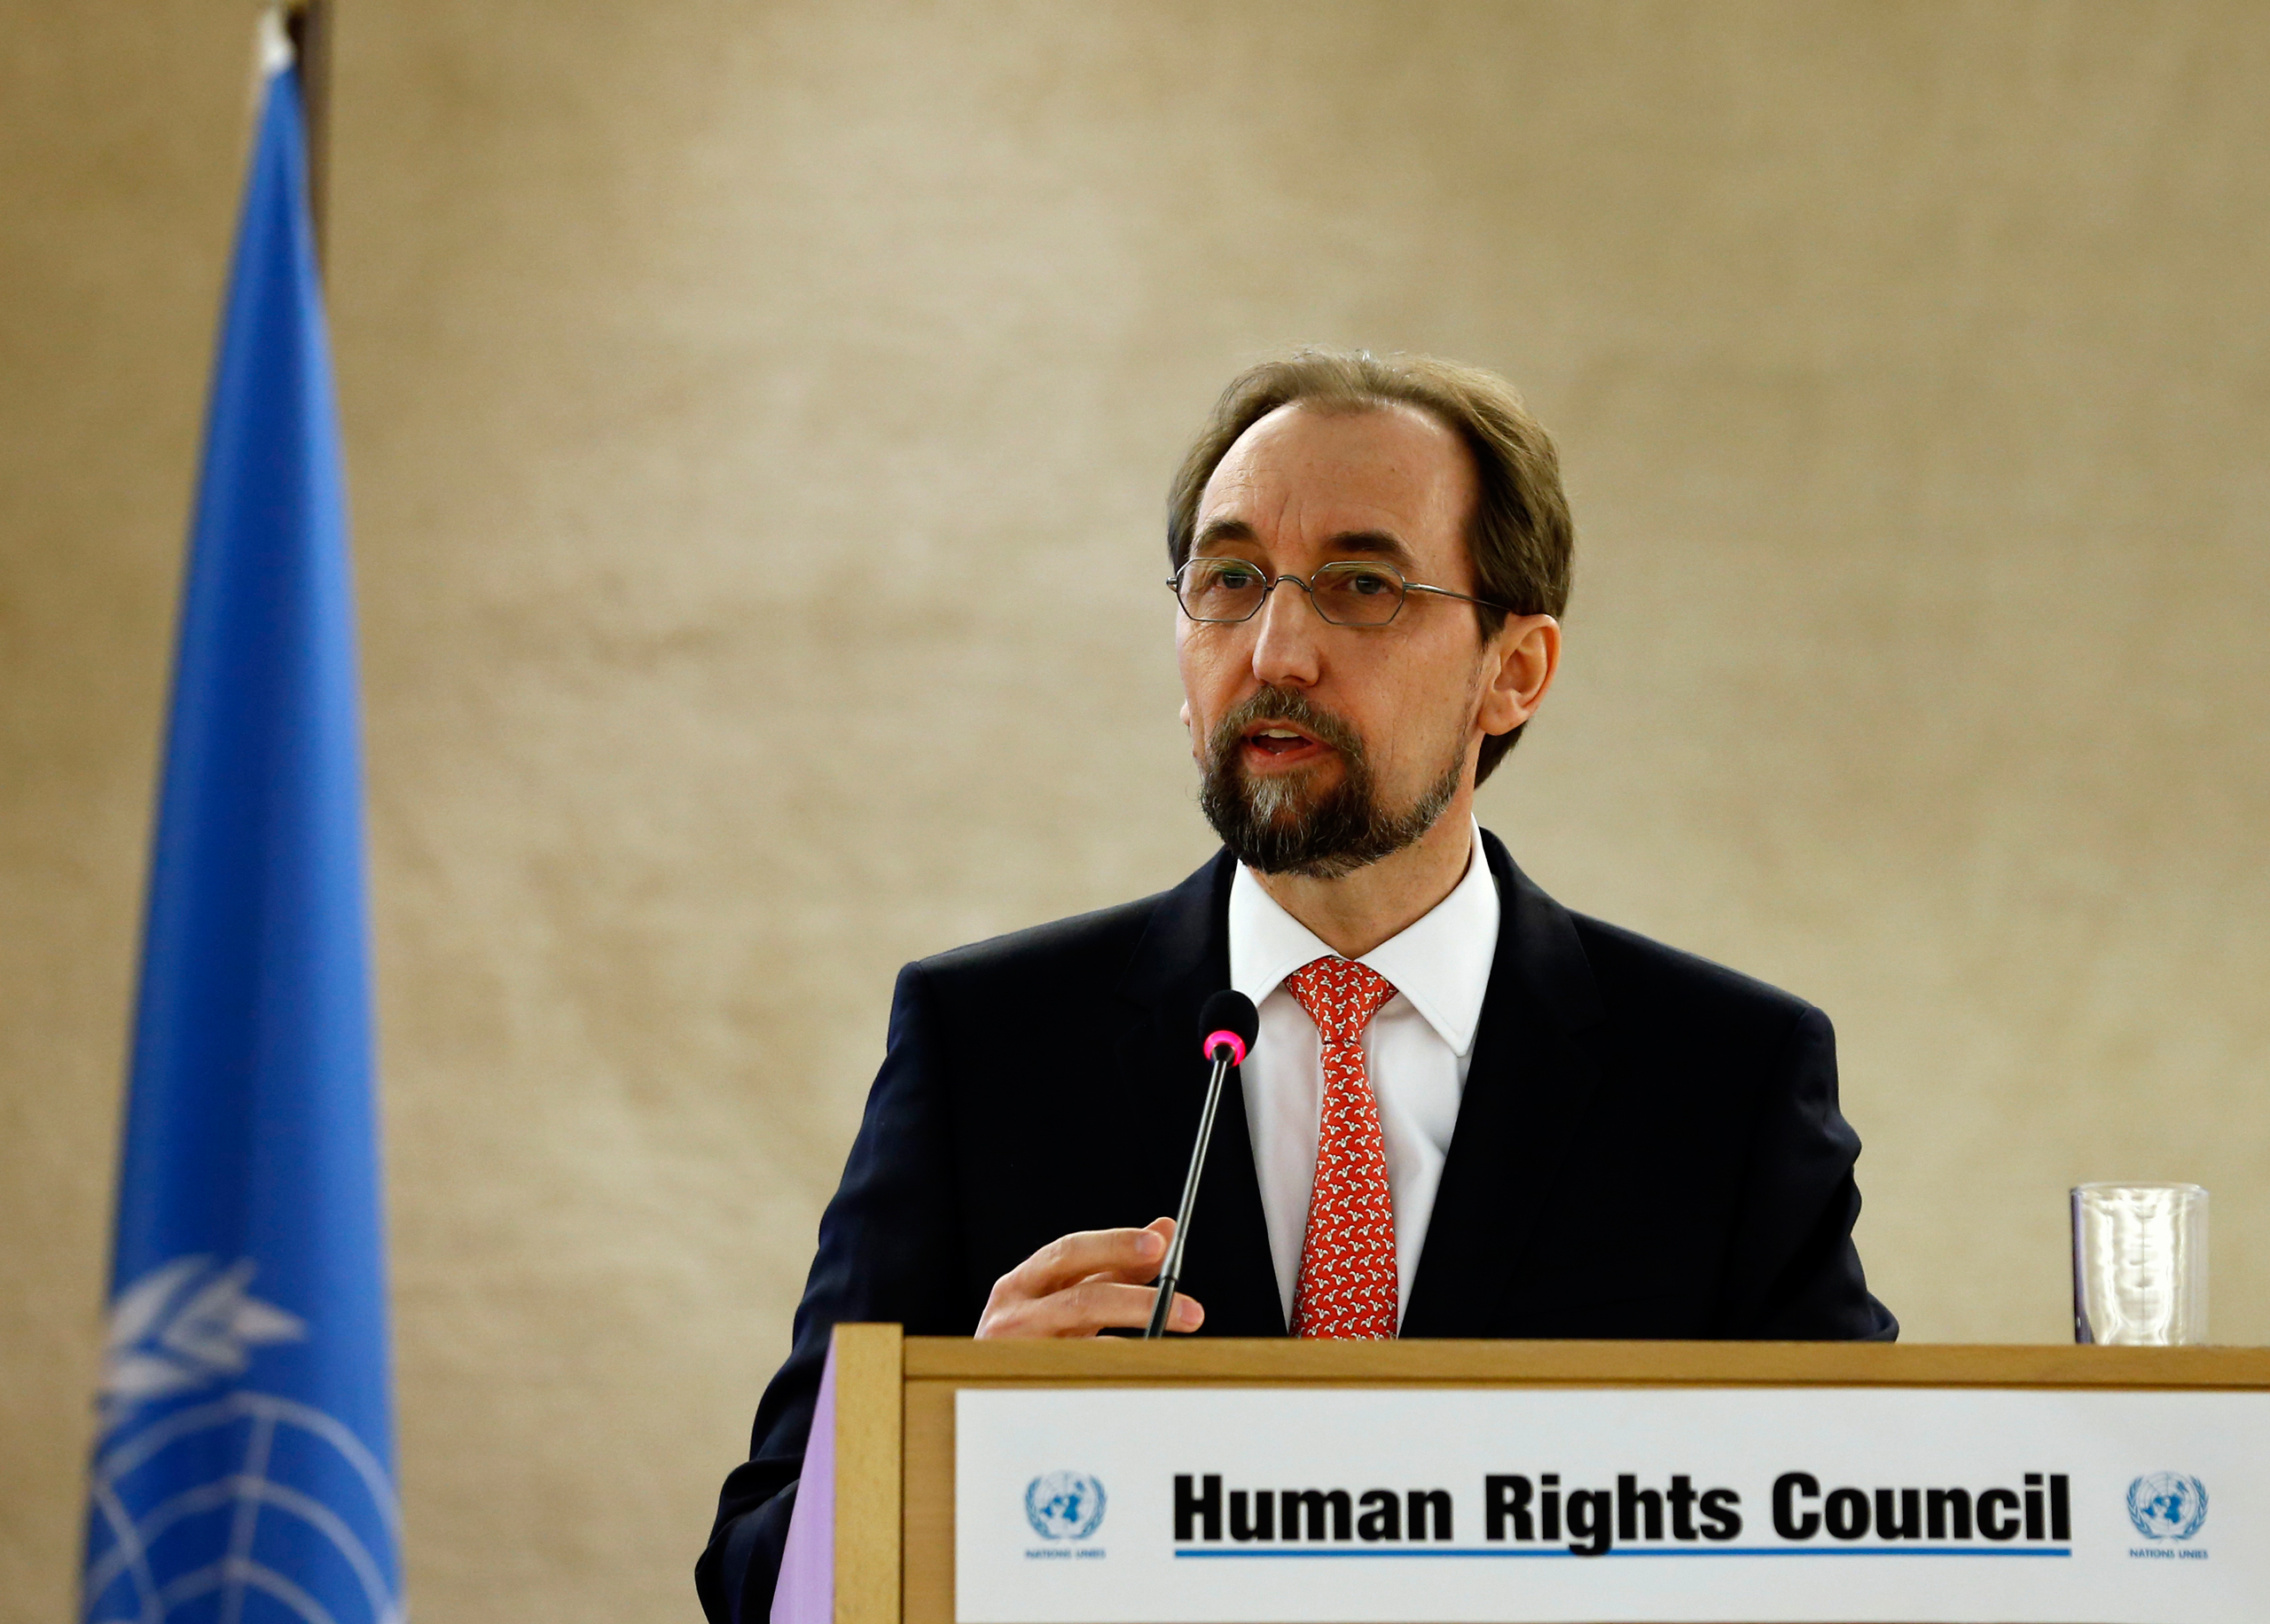 United Nations High Commissioner for Human Rights Zeid Ra'ad Al Hussein addresses the 31st session of the Human Rights Council at the U.N. European headquarters in Geneva on Feb. 29, 2016. (Denis Balibouse—Reuters)